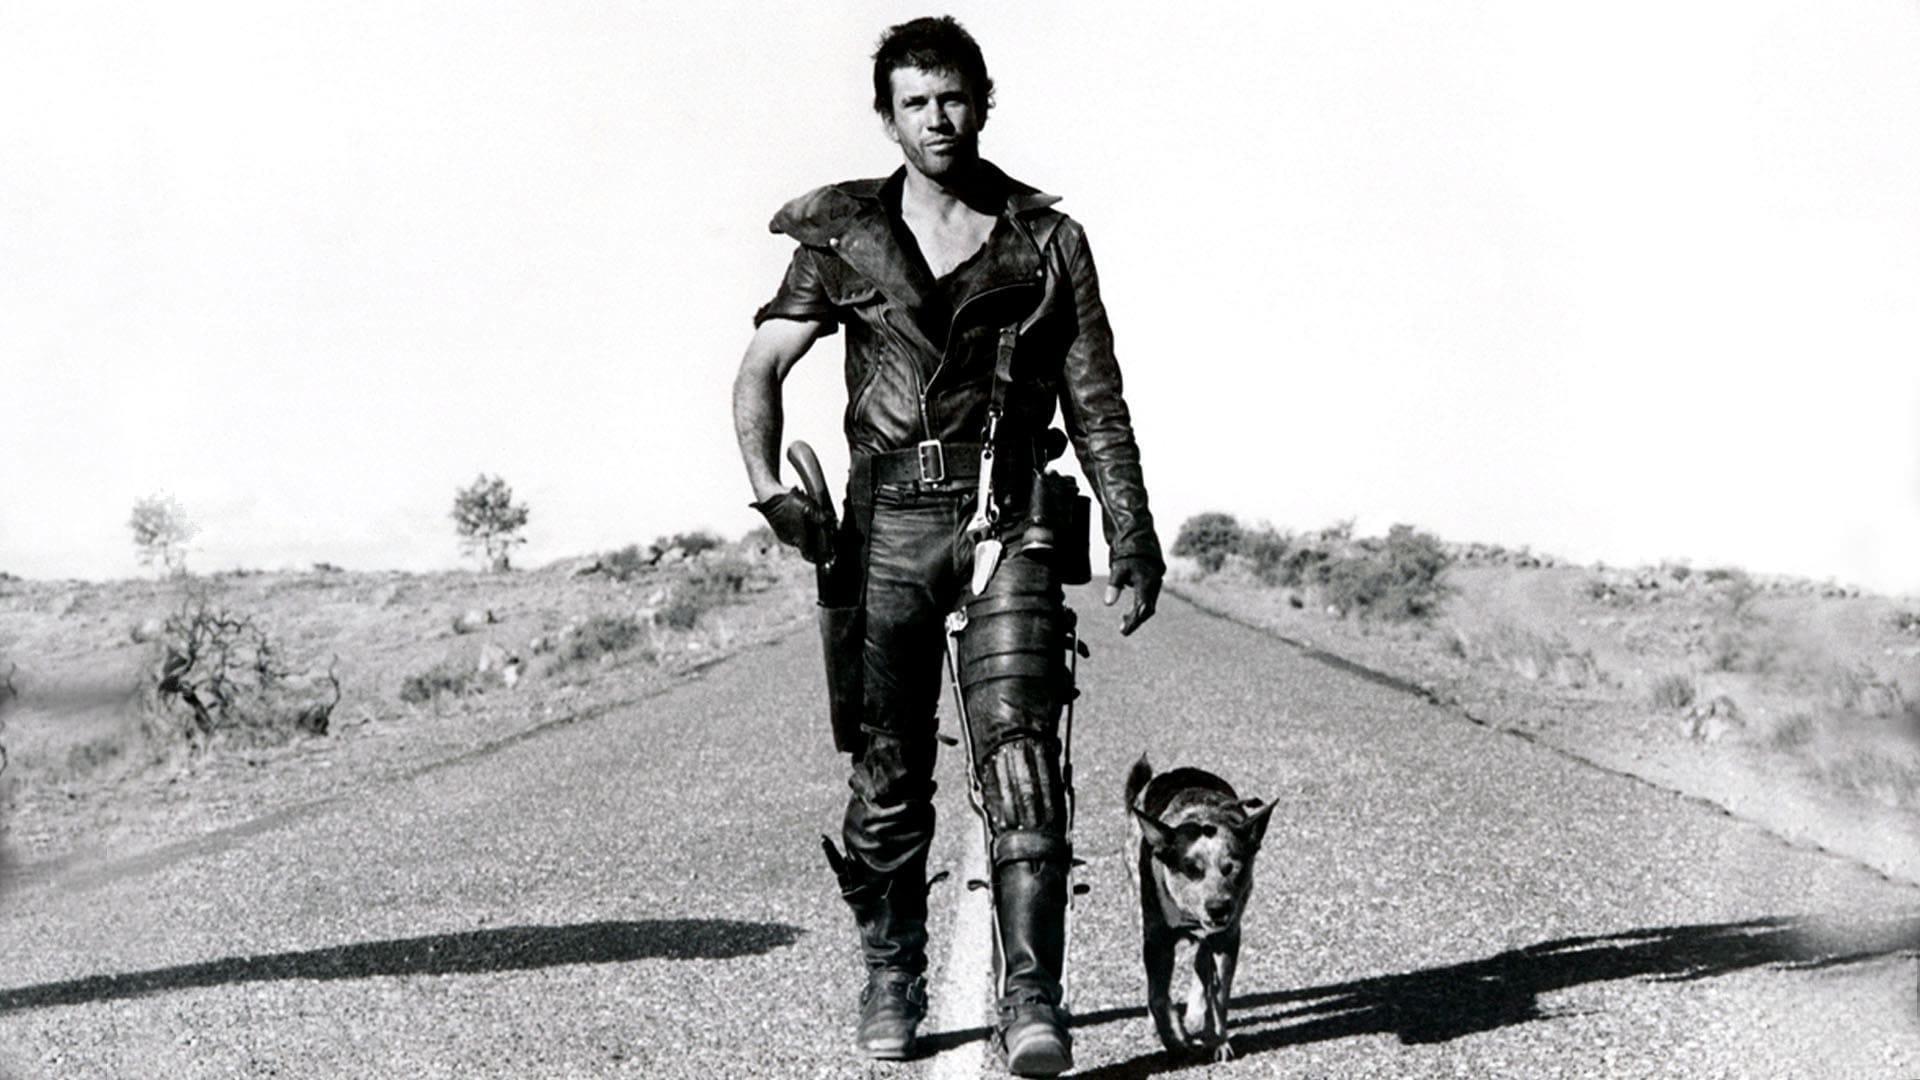 Mad Max is just one of the new titles available to stream on Tubi for November 2022.